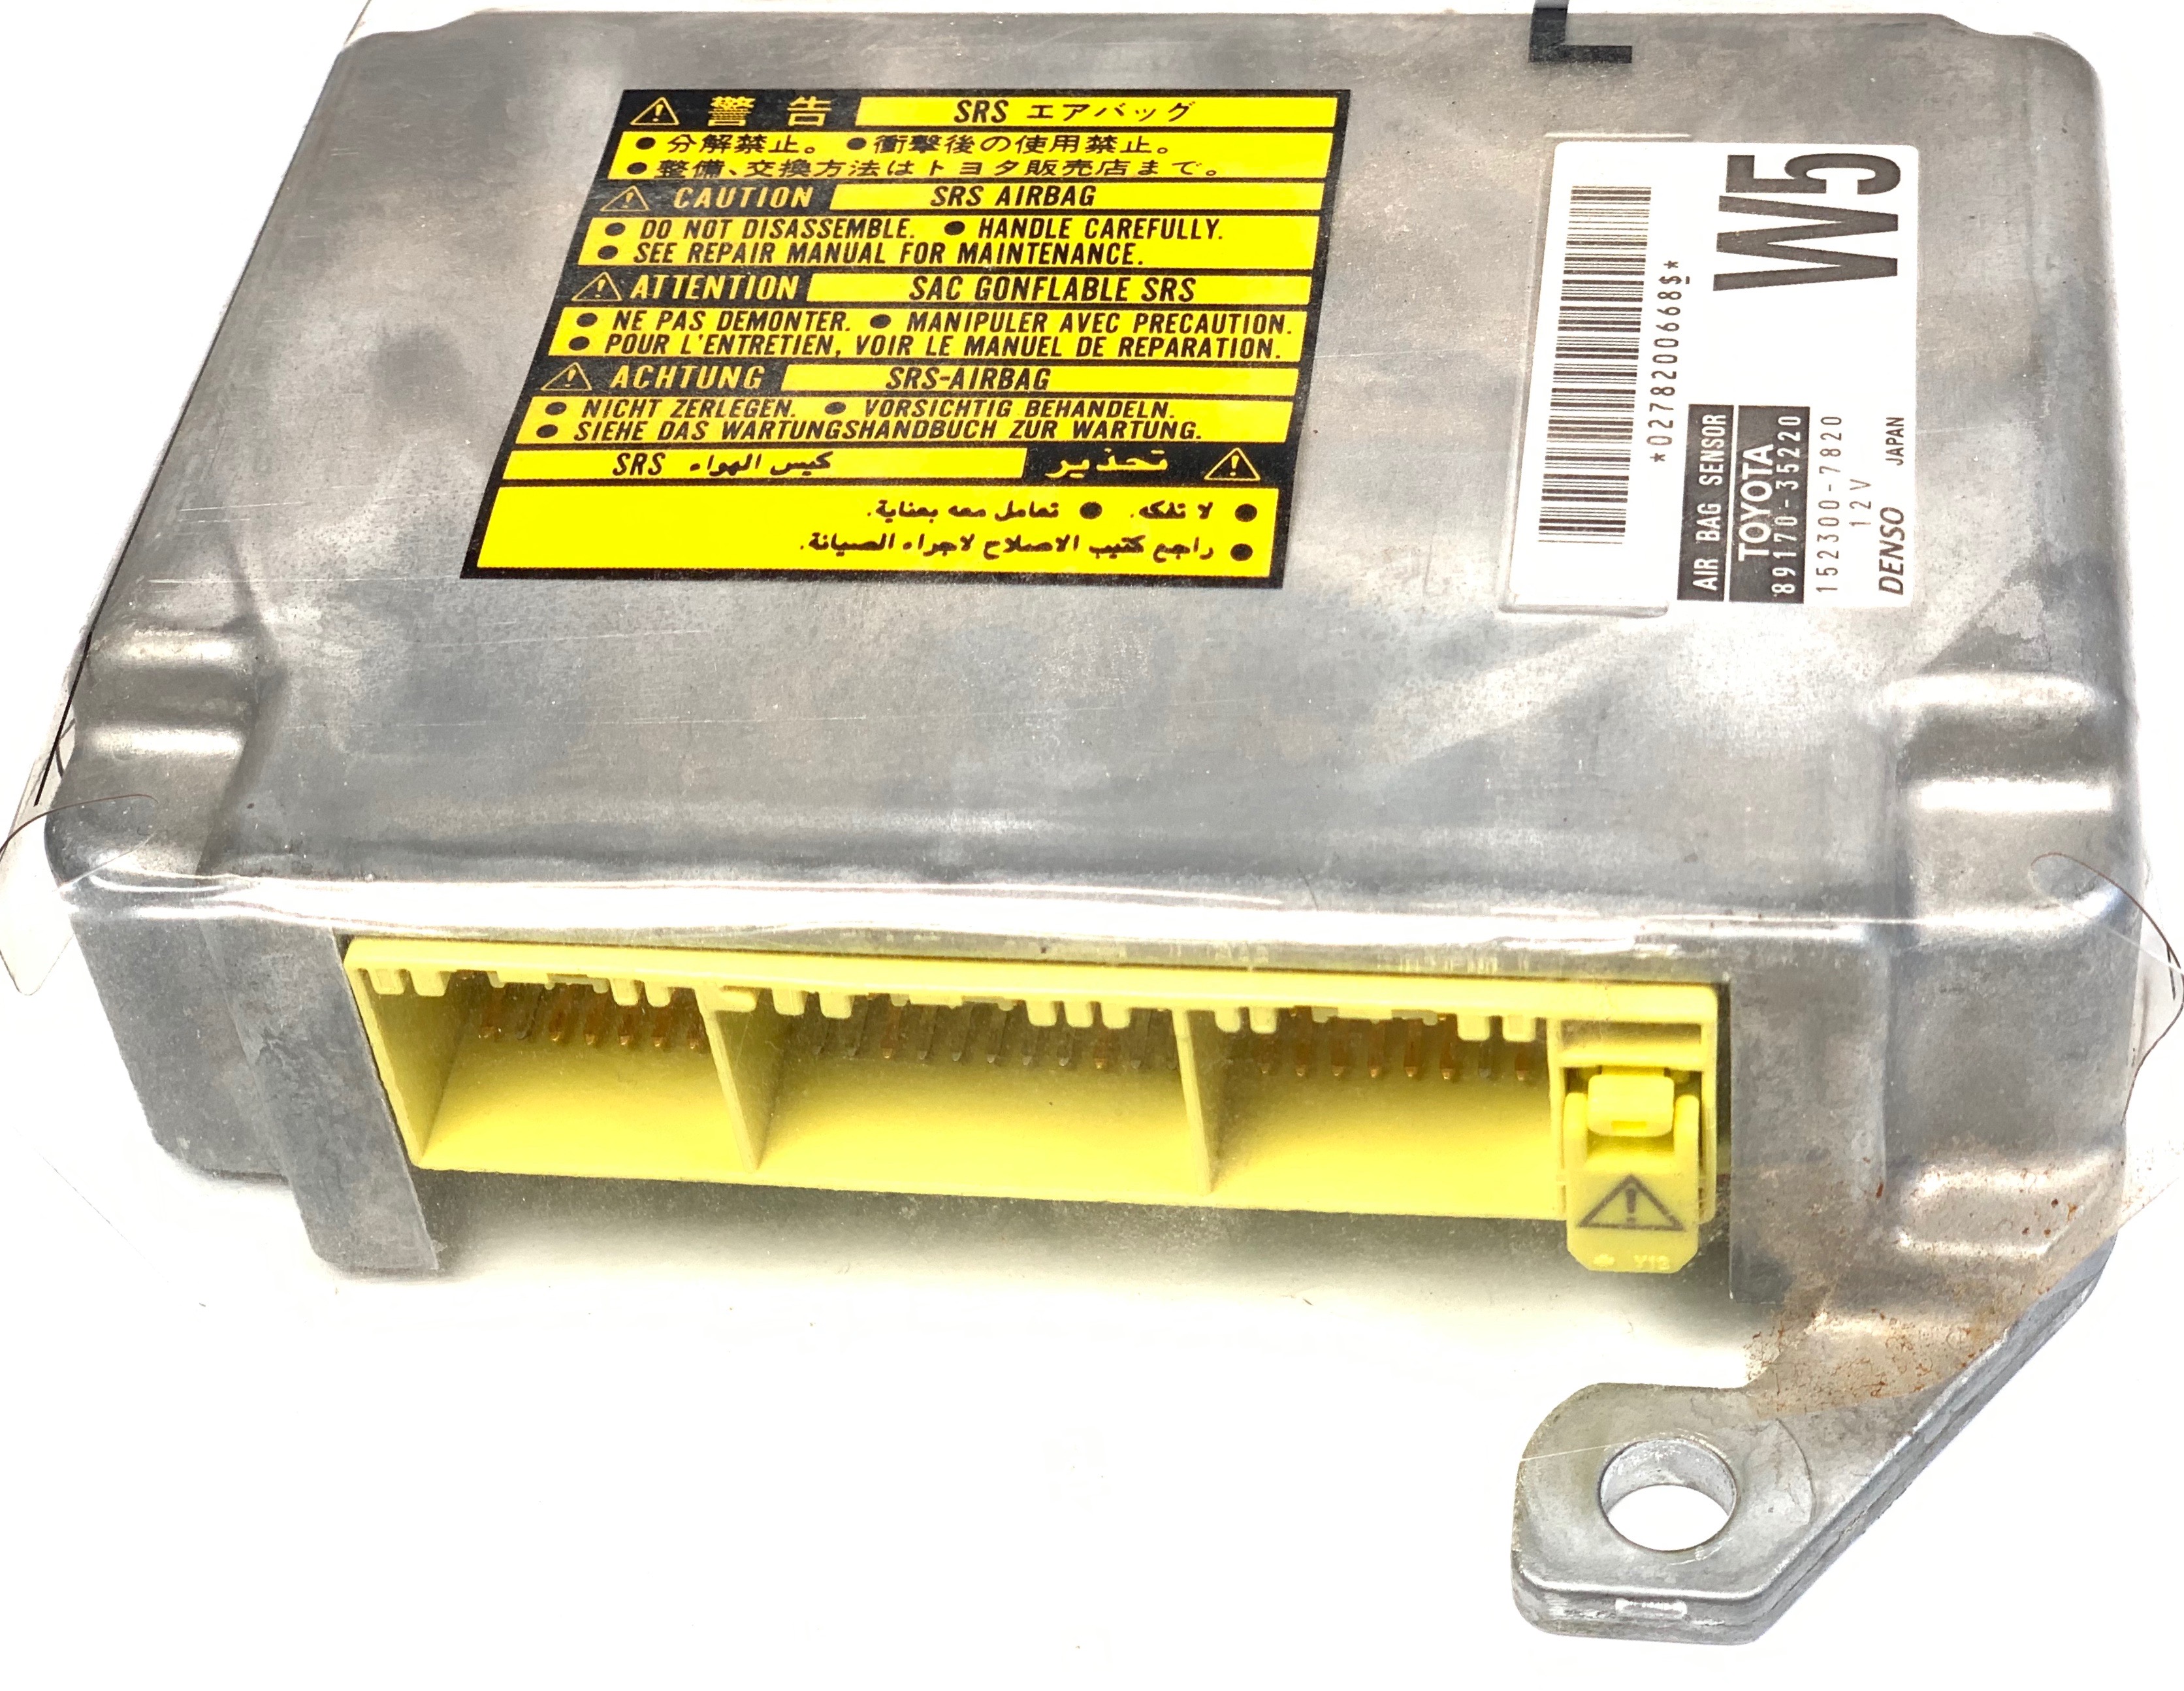 TOYOTA 4 RUNNER SRS Airbag Computer Diagnostic Control Module PART #8917035220